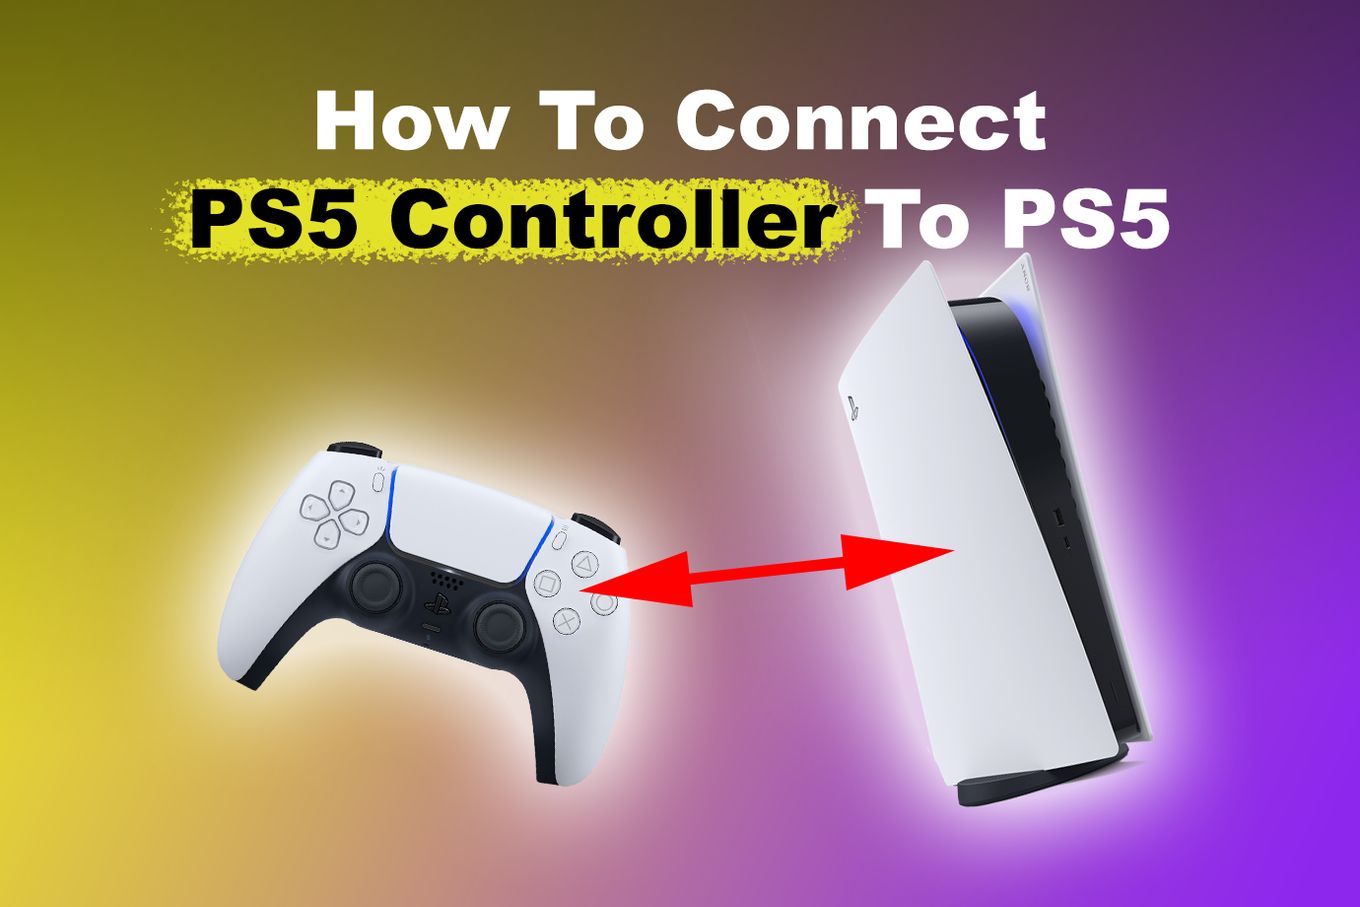 How to connect PS5 controller to PS4 console